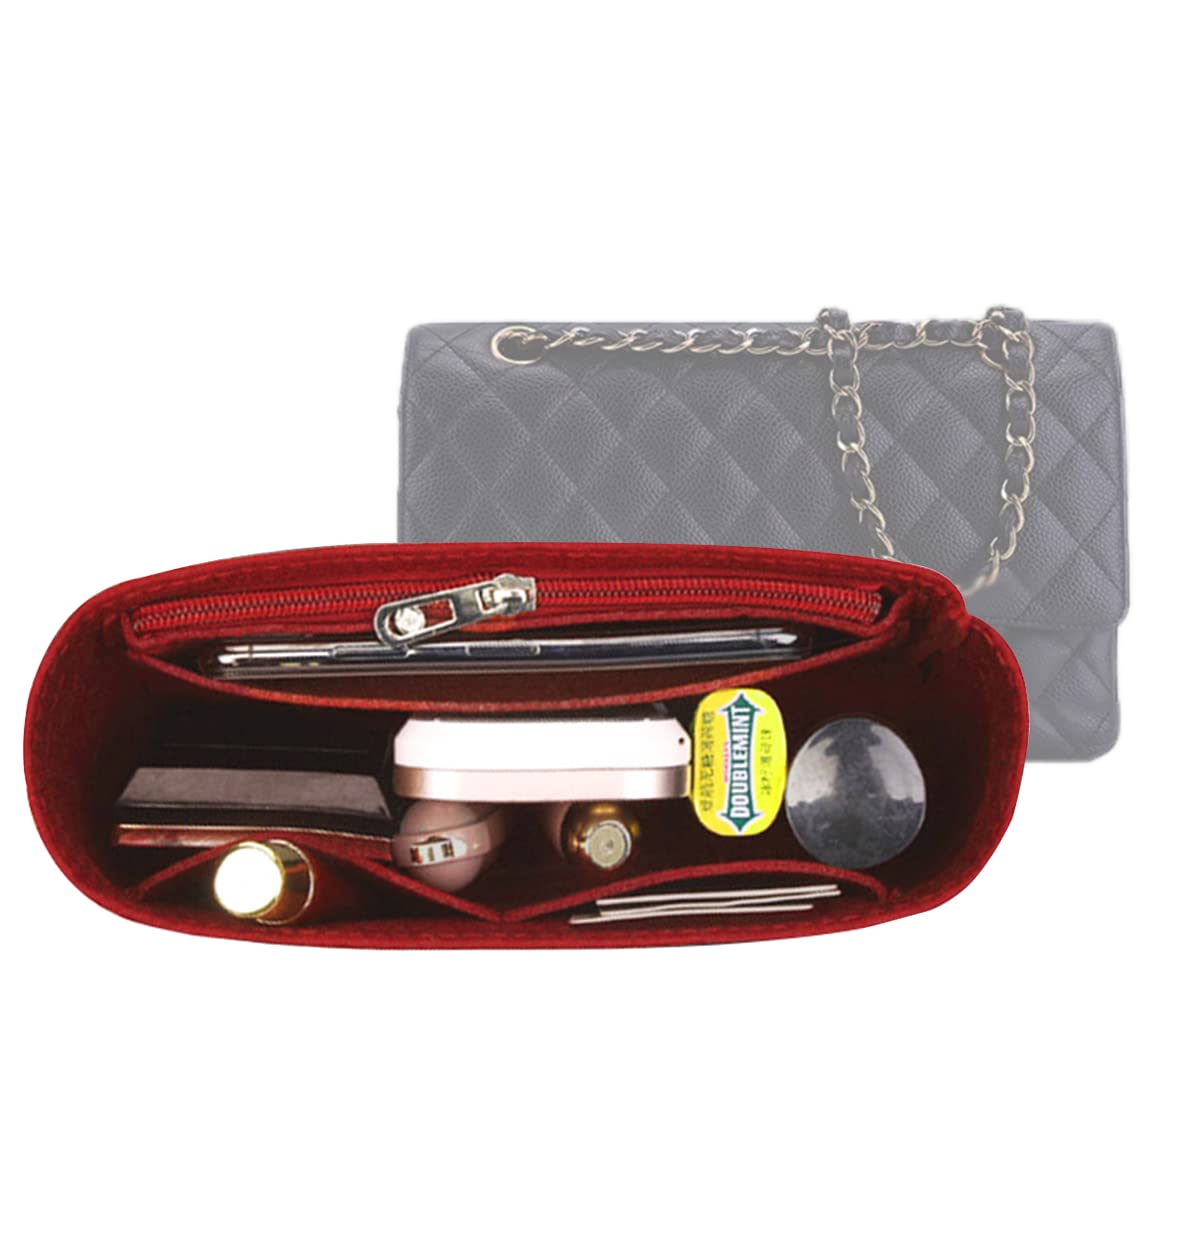 Premium High end version of Purse Organizer specially for Chanel